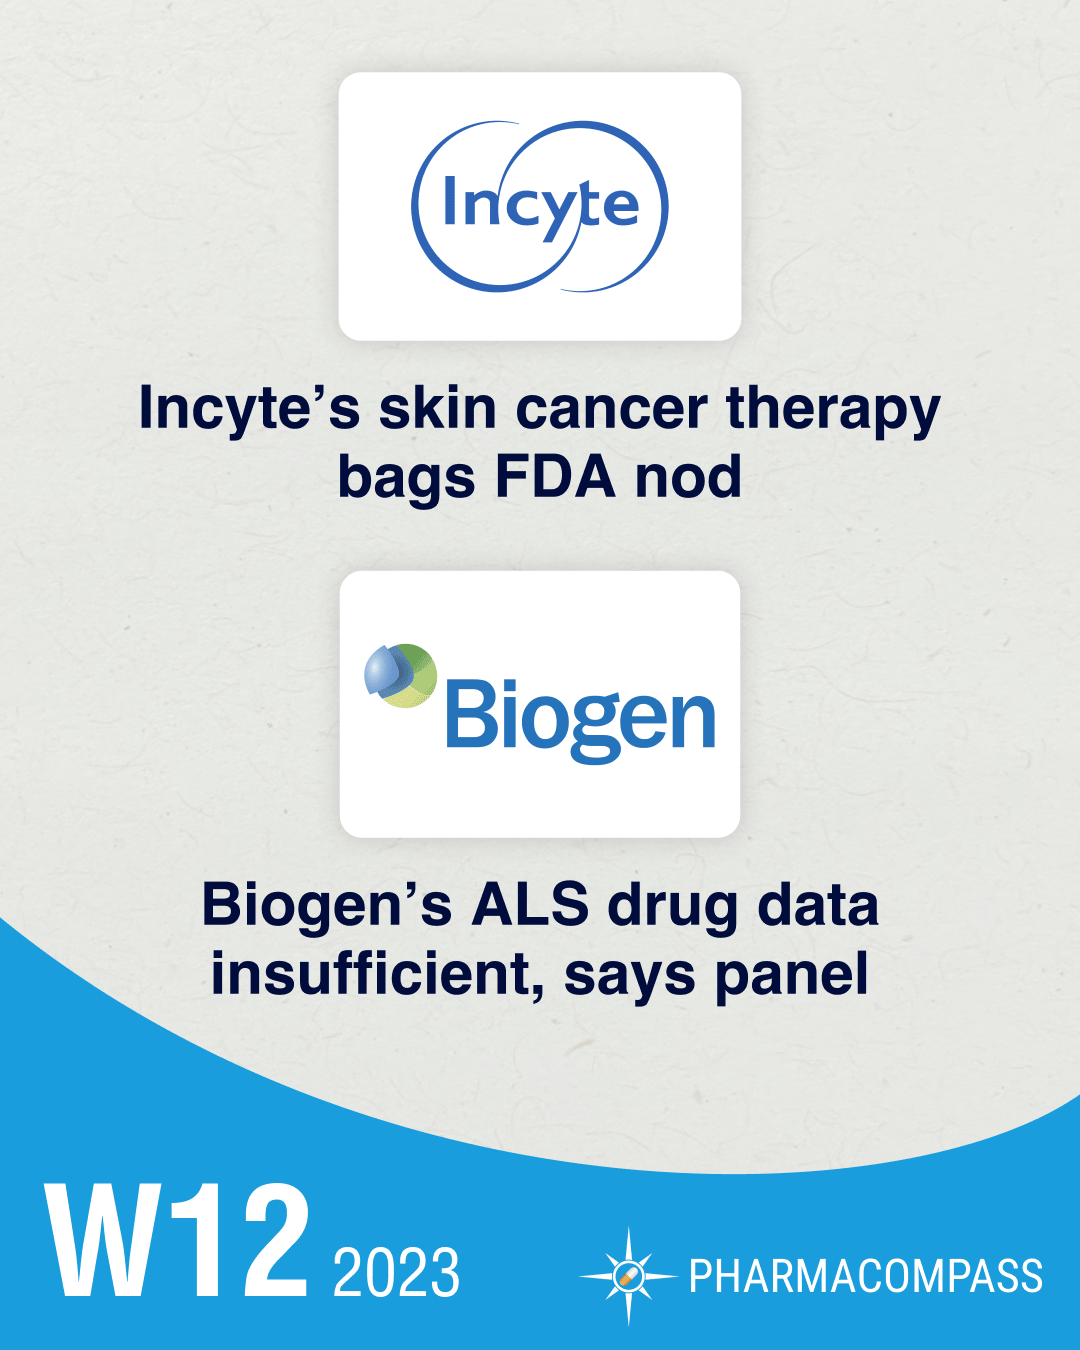 Incyte’s skin cancer therapy bags FDA nod; Biogen’s ALS drug data insufficient, says panel